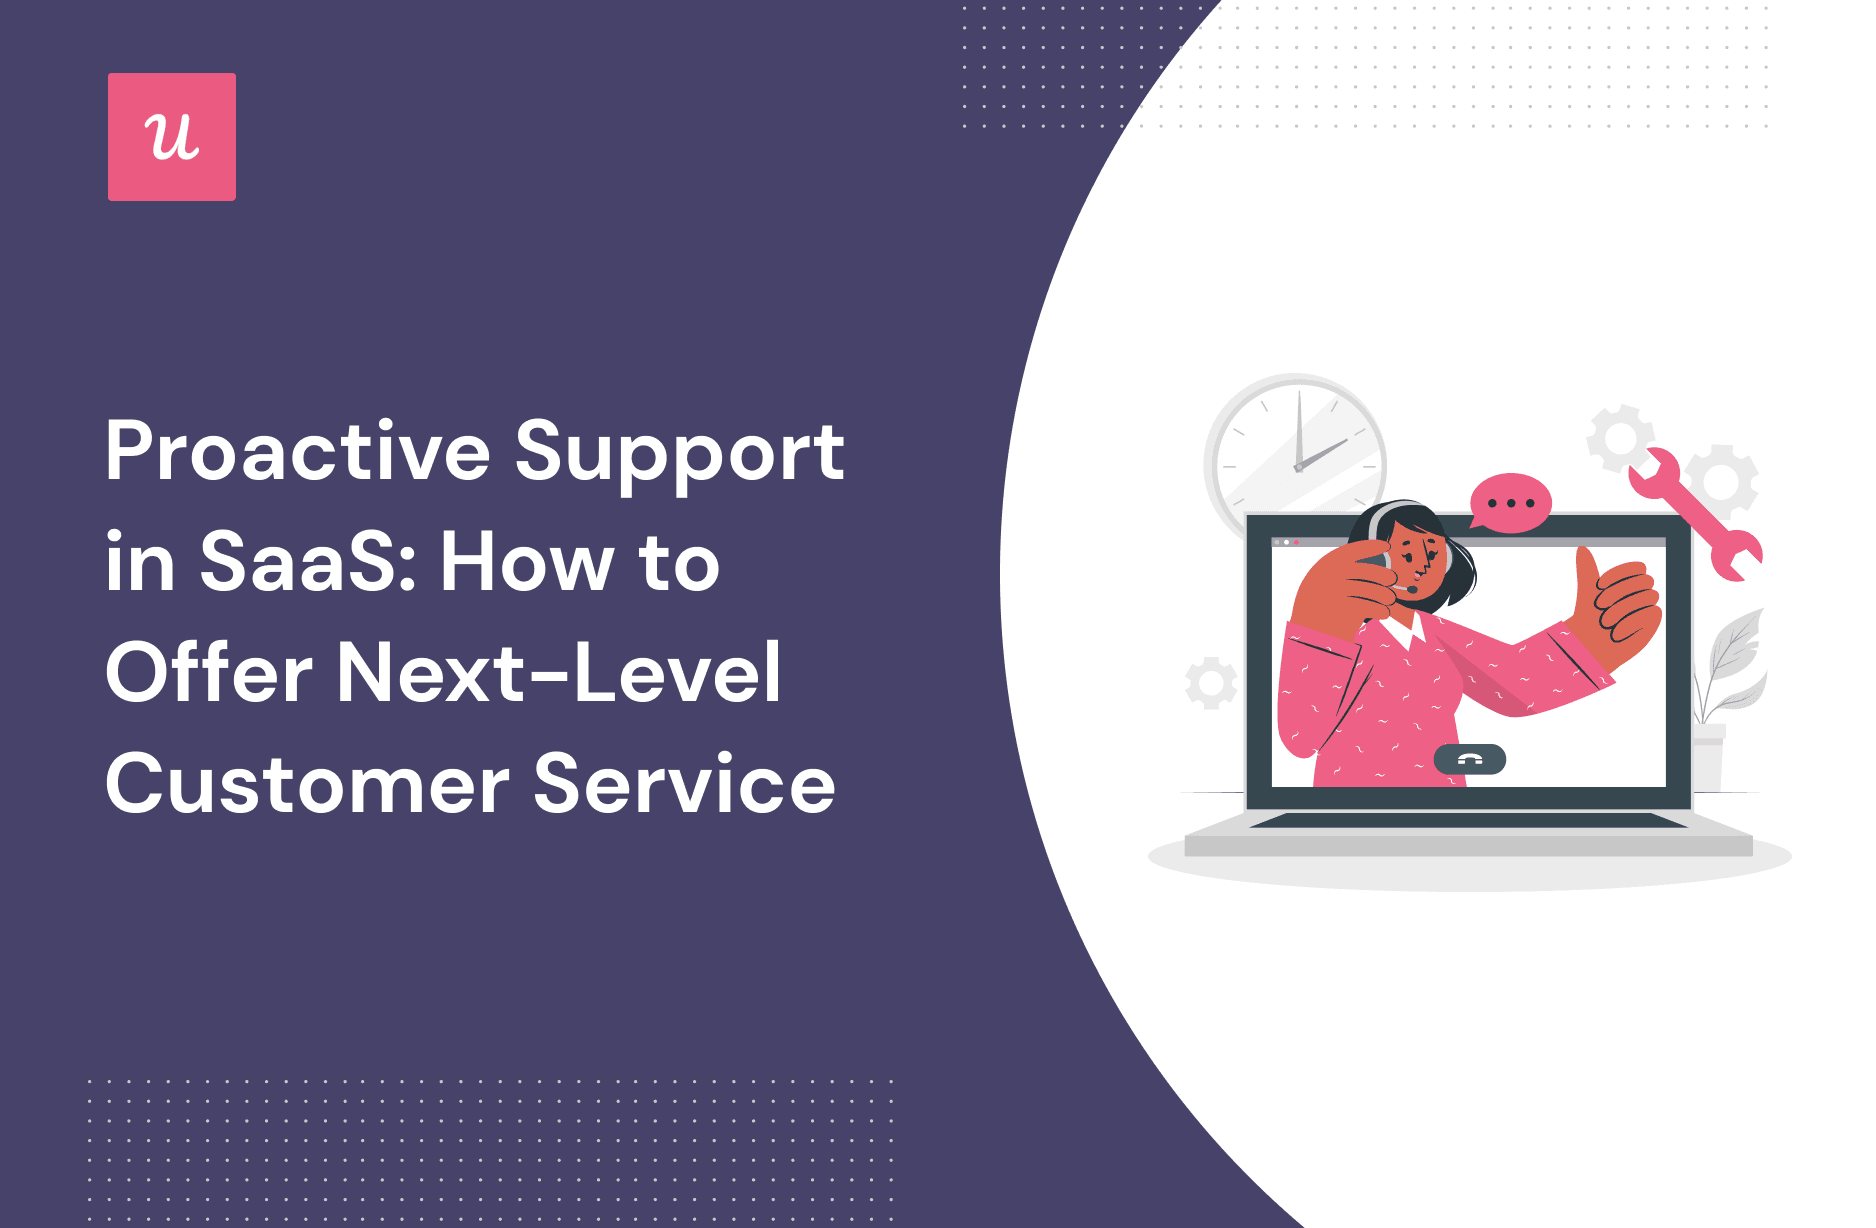 Proactive Support in SaaS: How to Offer Next-Level Customer Service